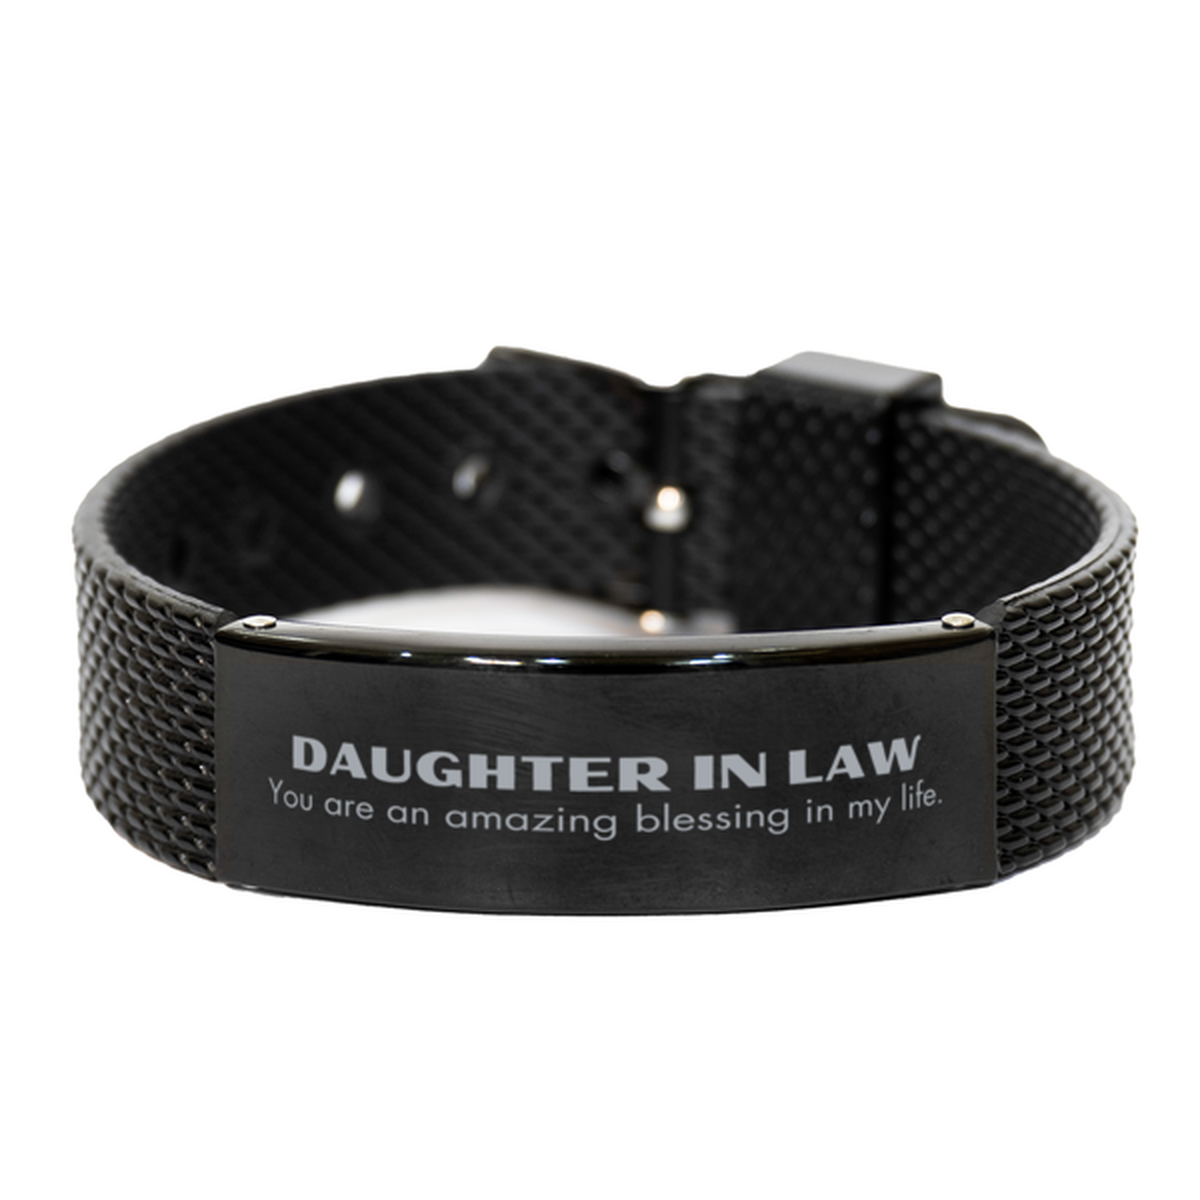 Daughter In Law Black Shark Mesh Bracelet, You are an amazing blessing in my life, Thank You Gifts For Daughter In Law, Inspirational Birthday Christmas Unique Gifts For Daughter In Law